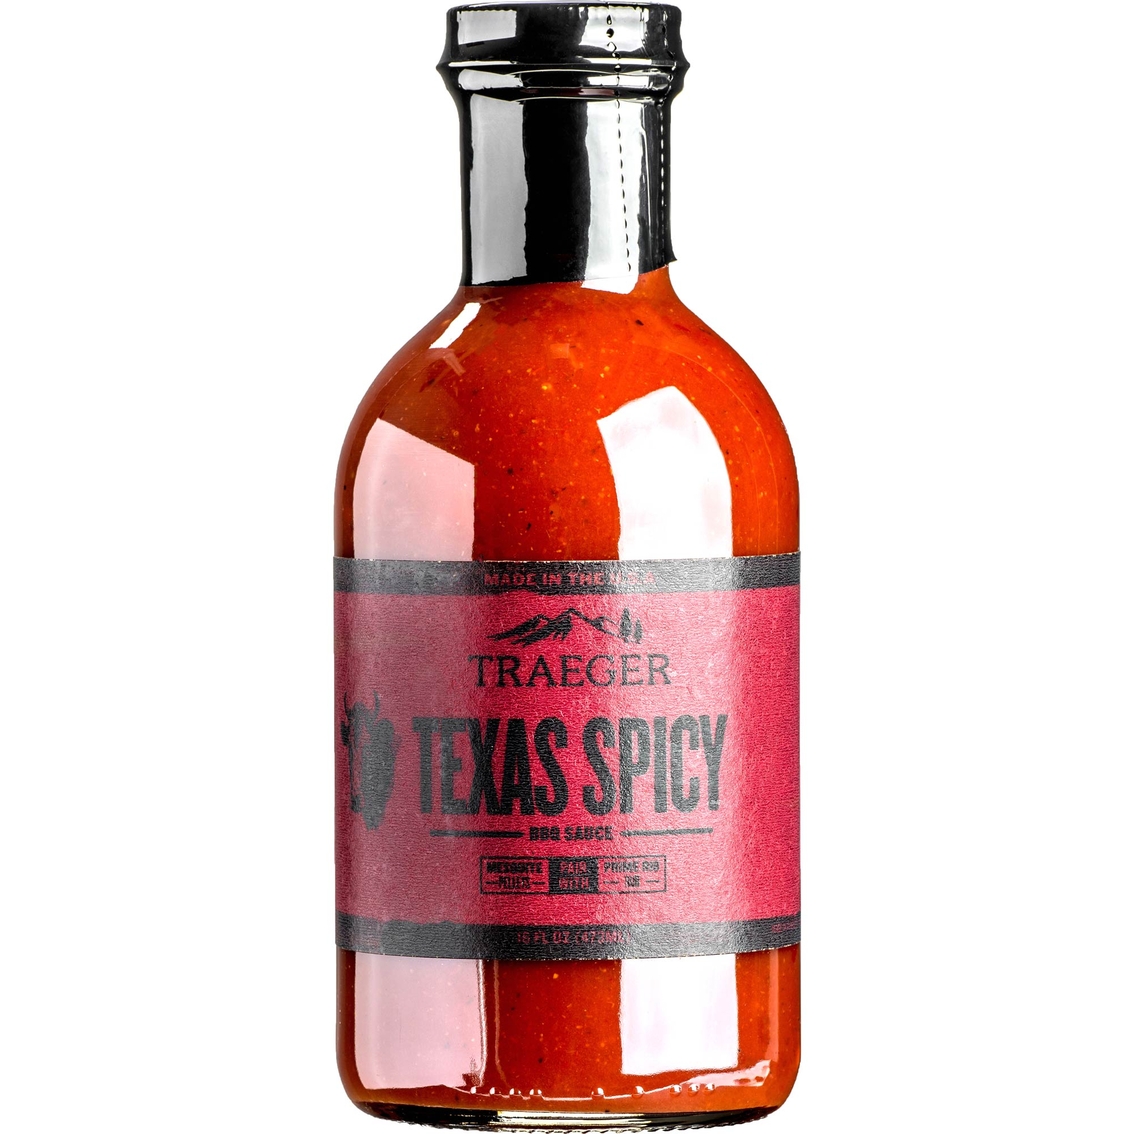 Traeger Texas Spicy BBQ Sauce 16 oz. - Image 1 of 3